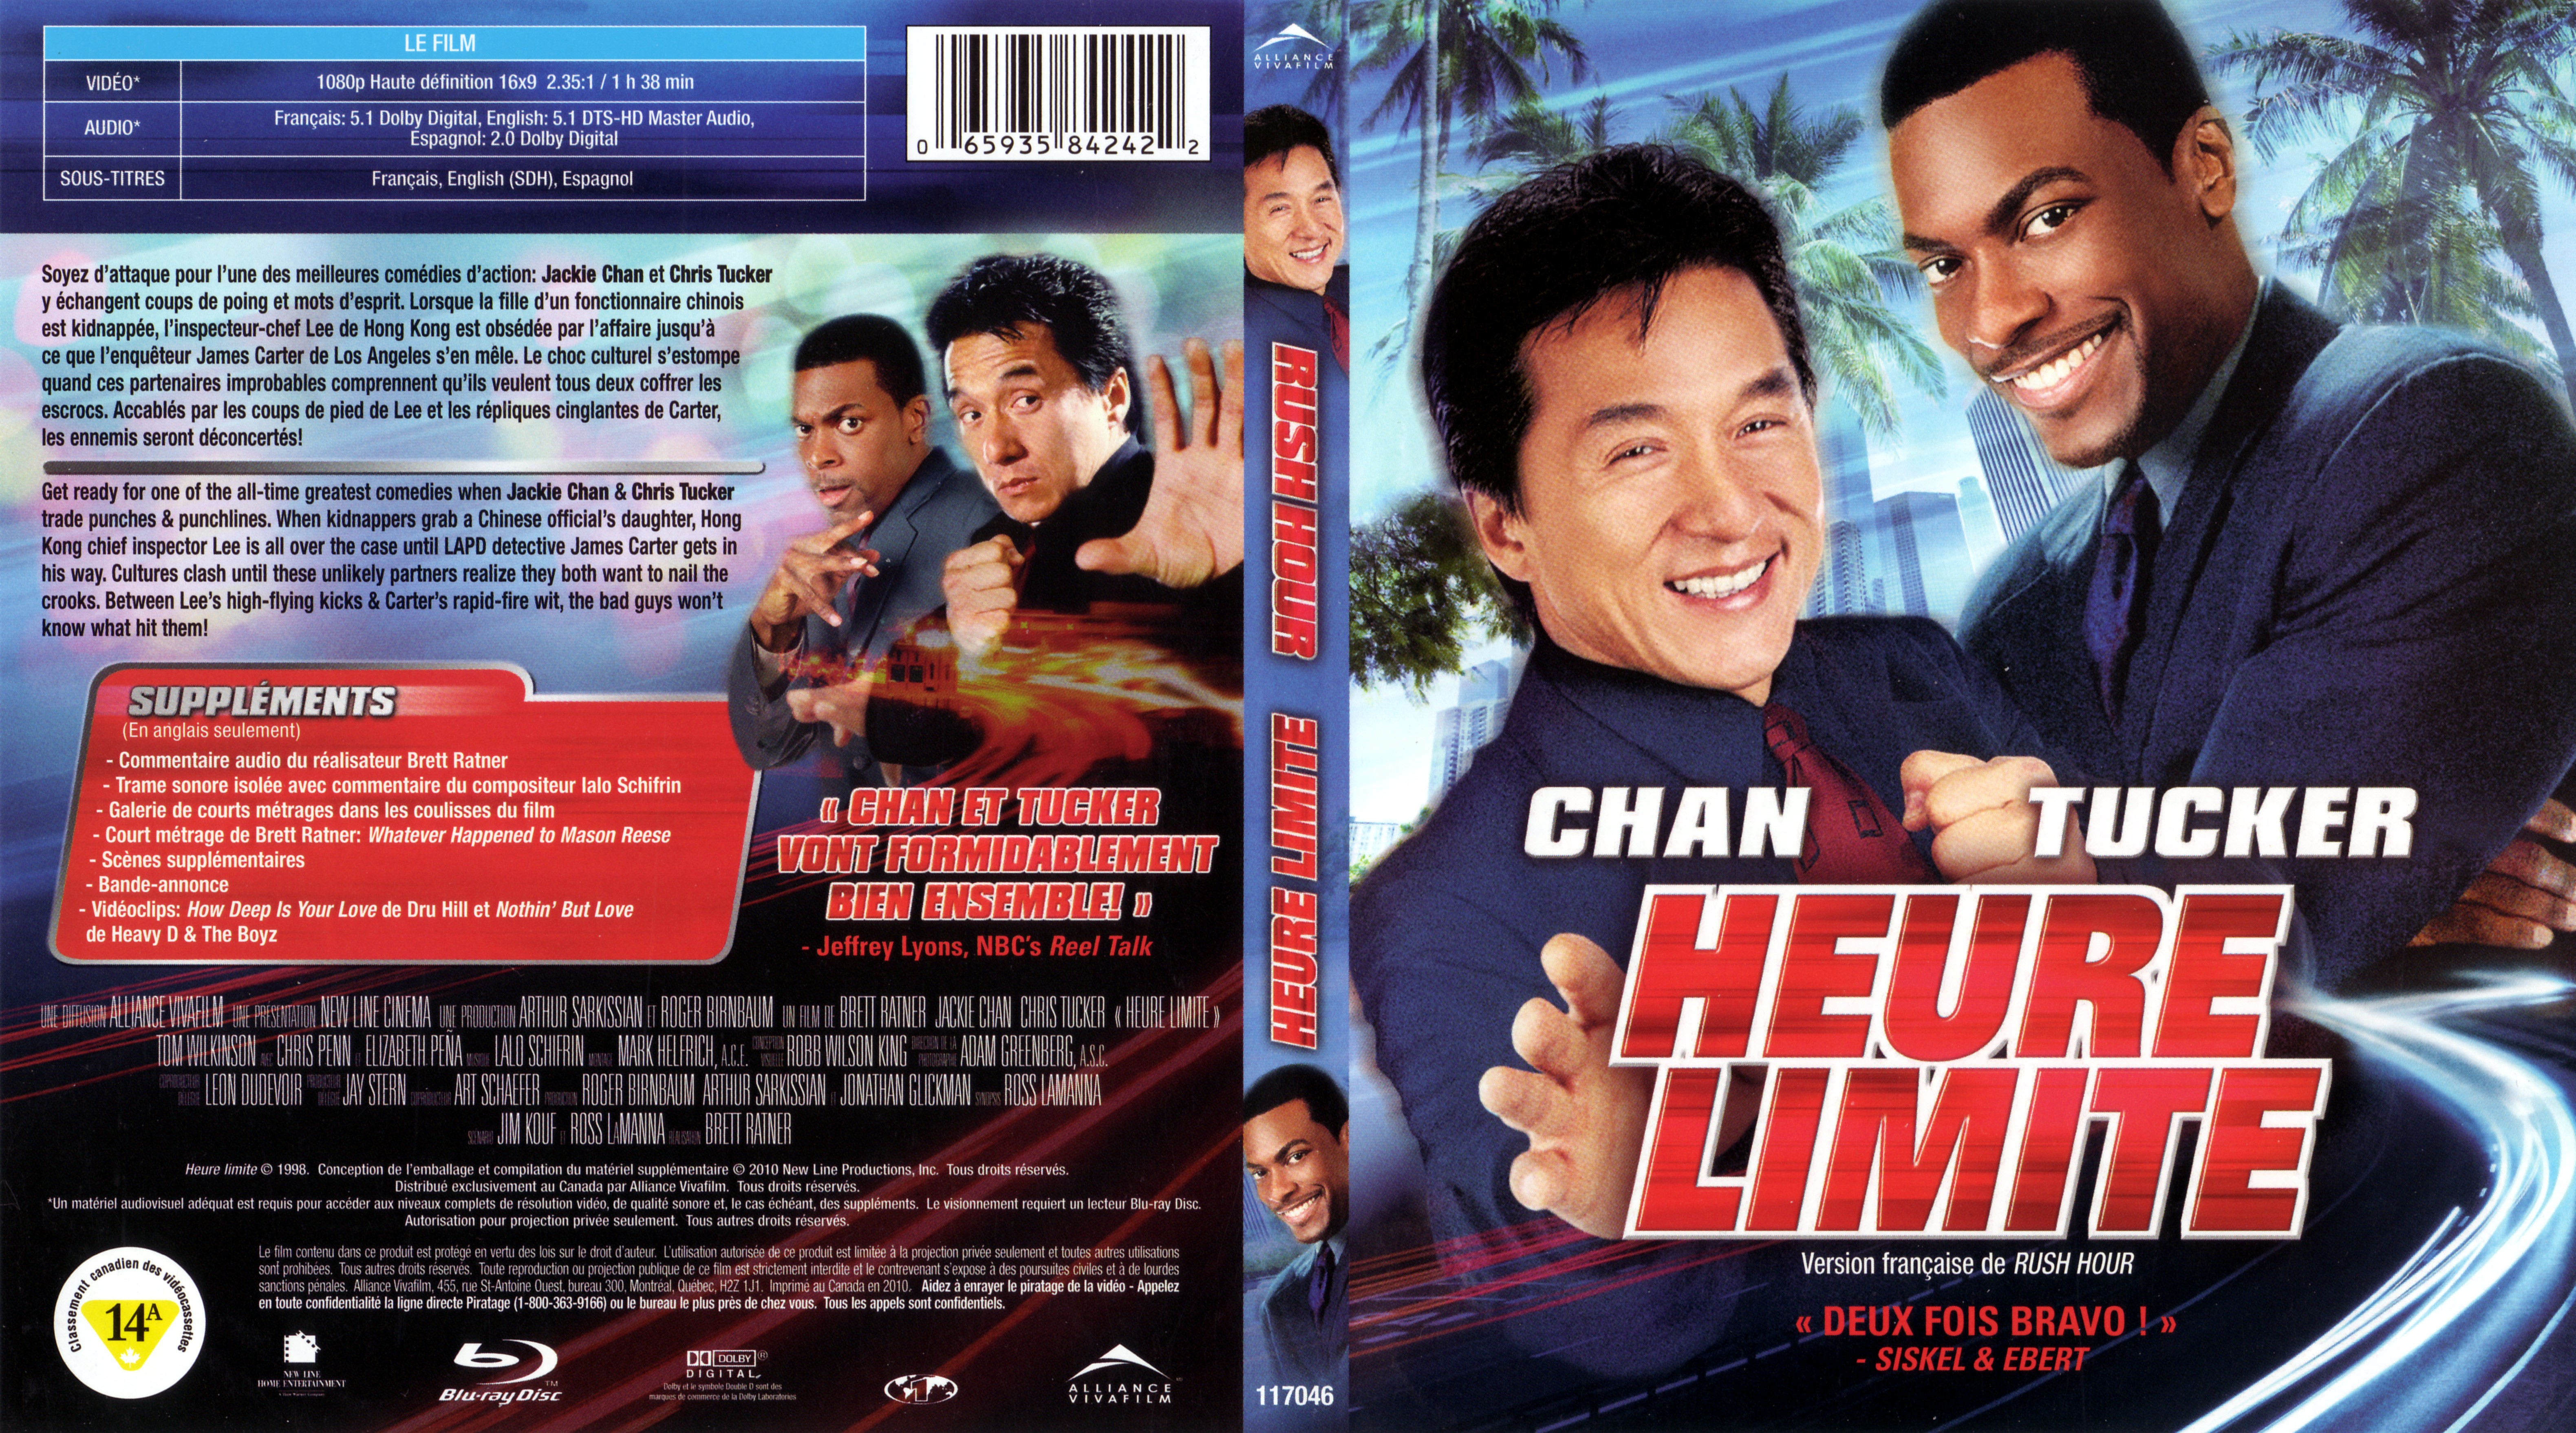 Jaquette DVD Heure limite - Rush hour (Canadienne) (BLU-RAY) v2